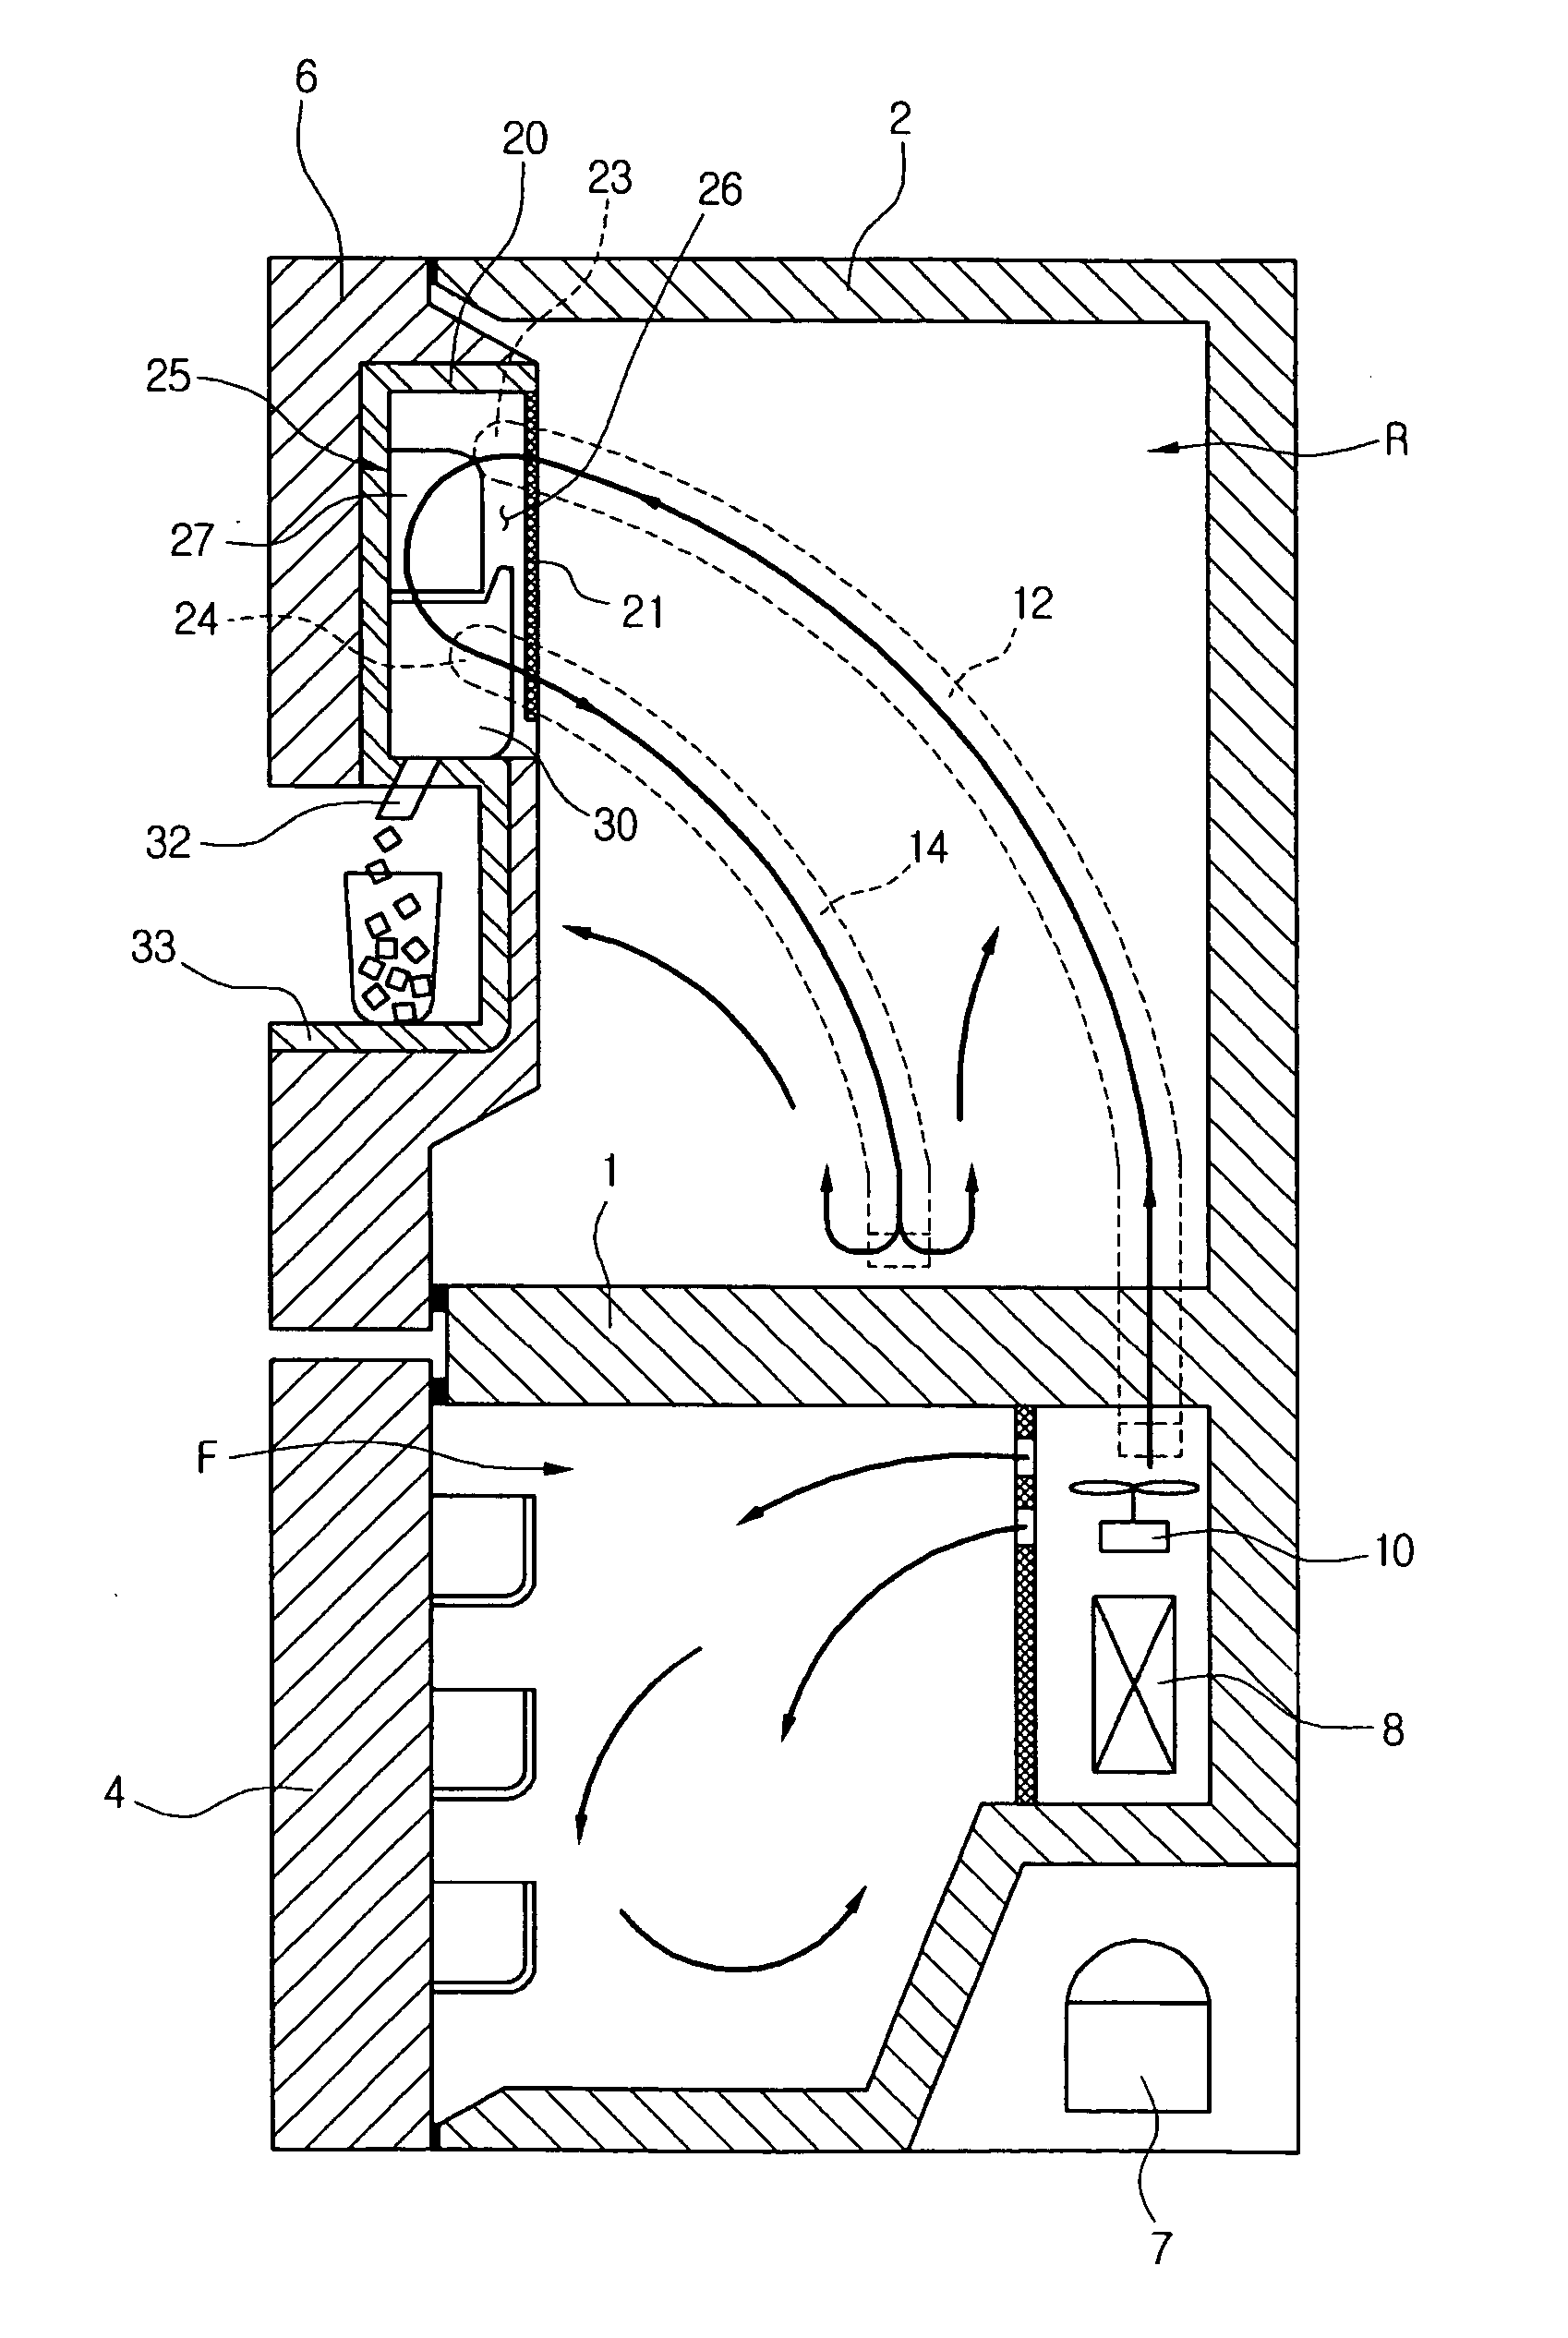 Refrigerator and airflow passage for ice making compartment of the same